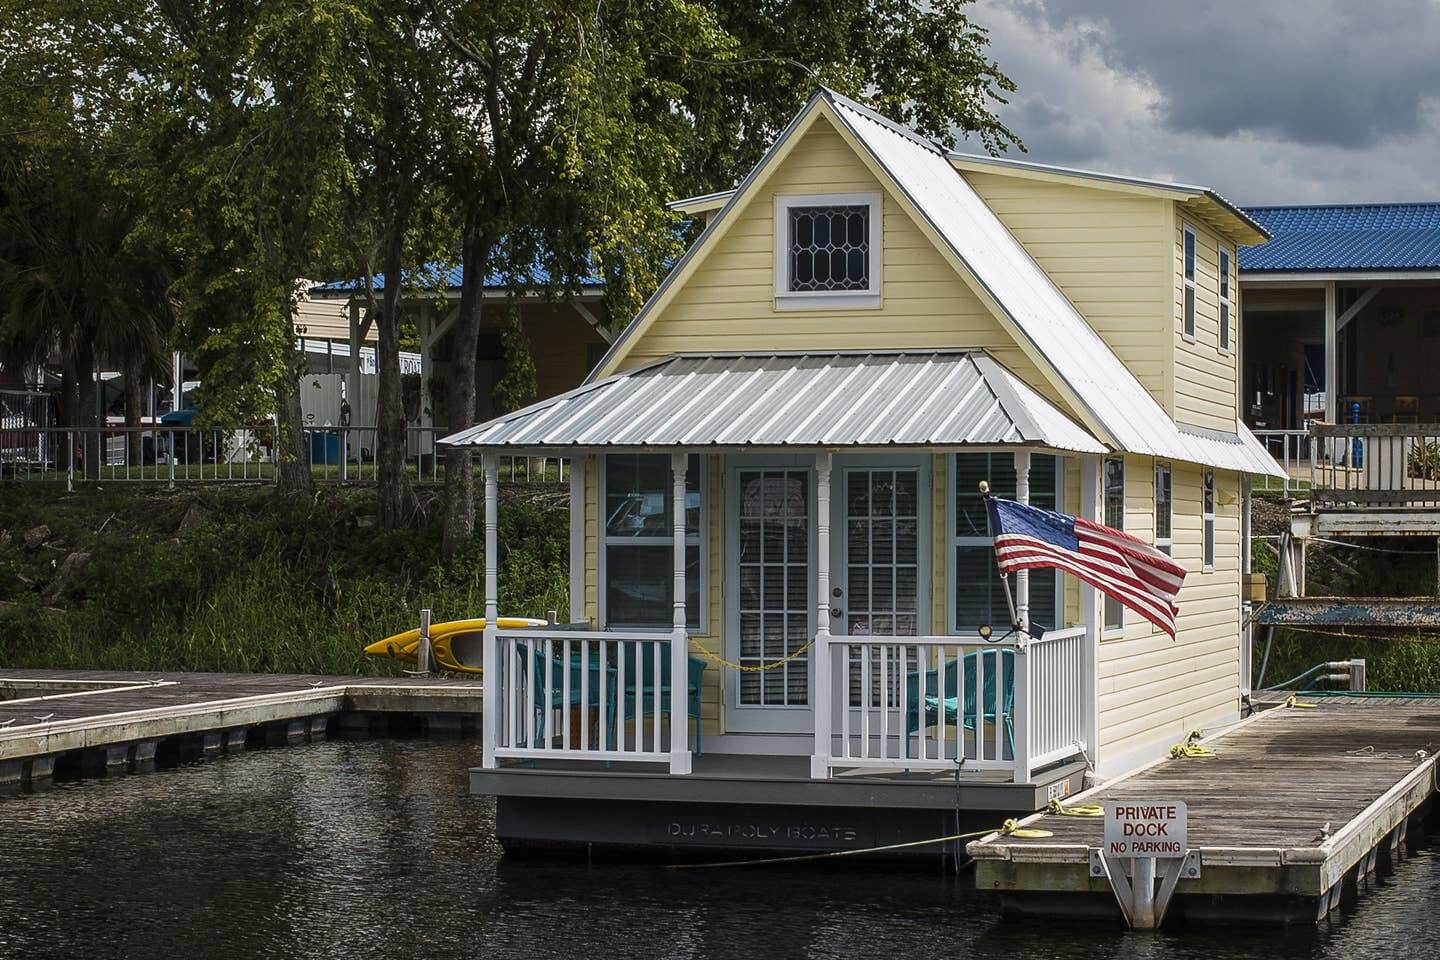 Photo of a Floating cottage house